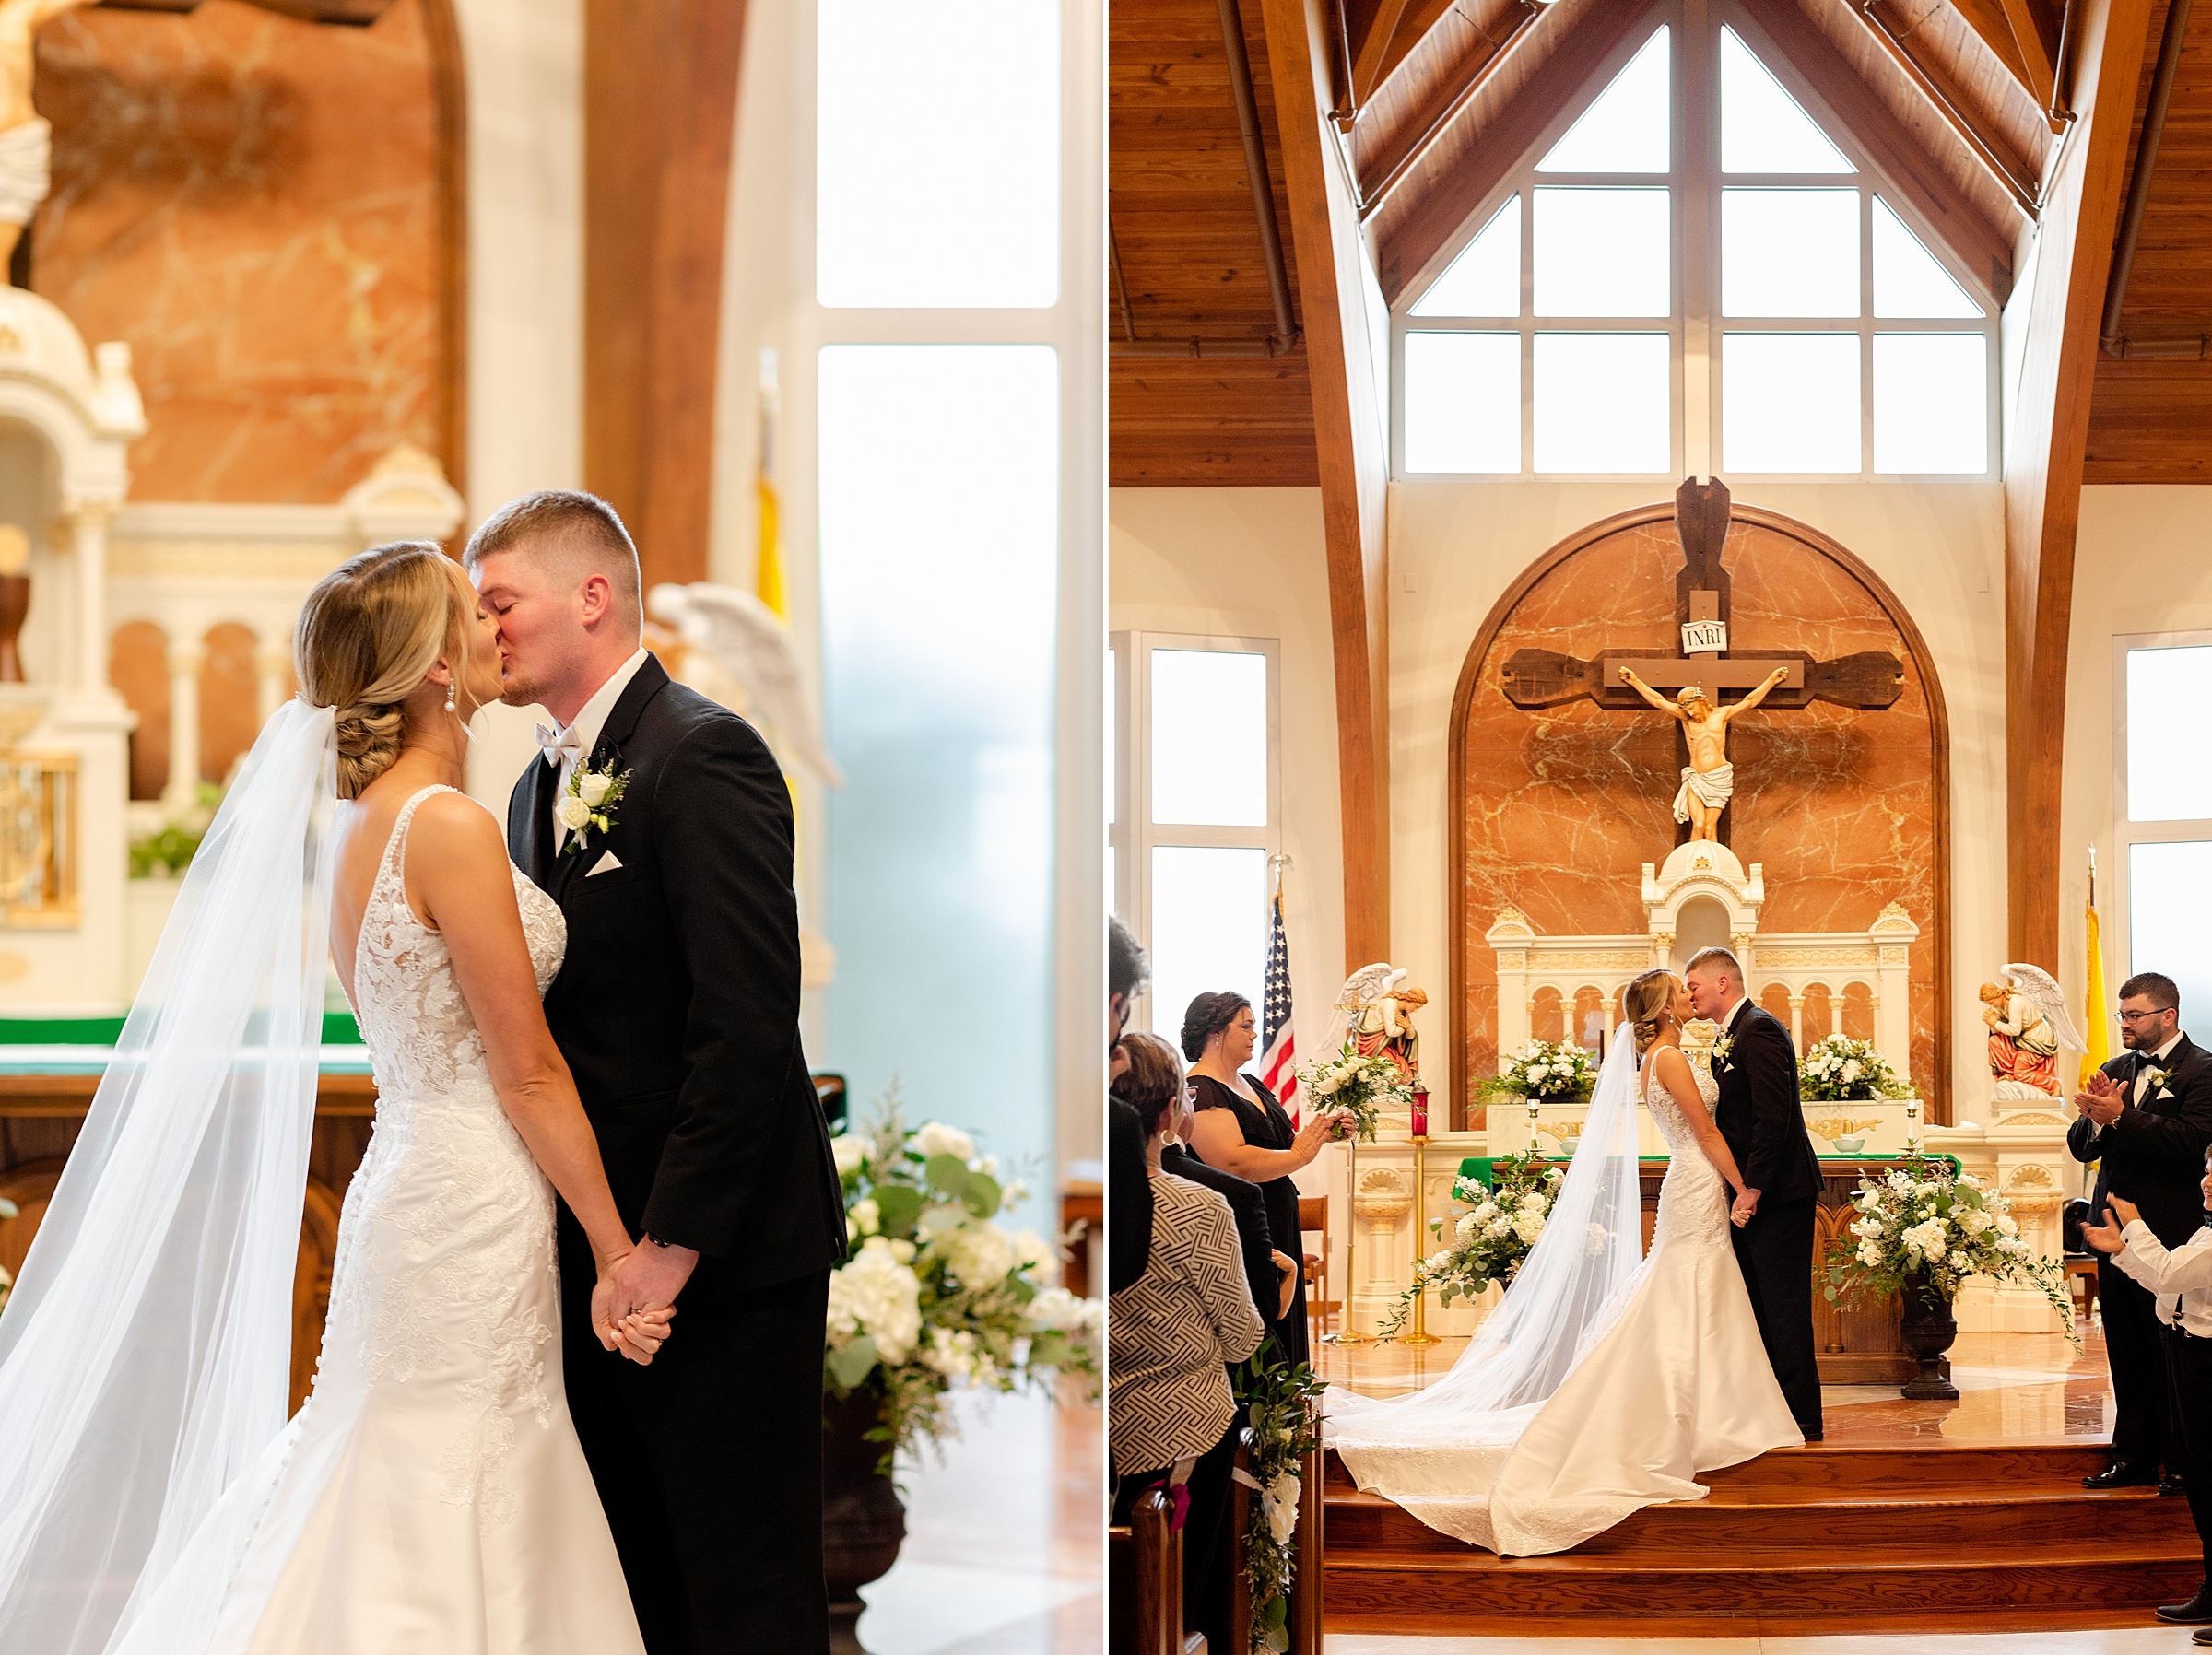 Hannah and Cody's Wedding in Booneville, IN150.jpg